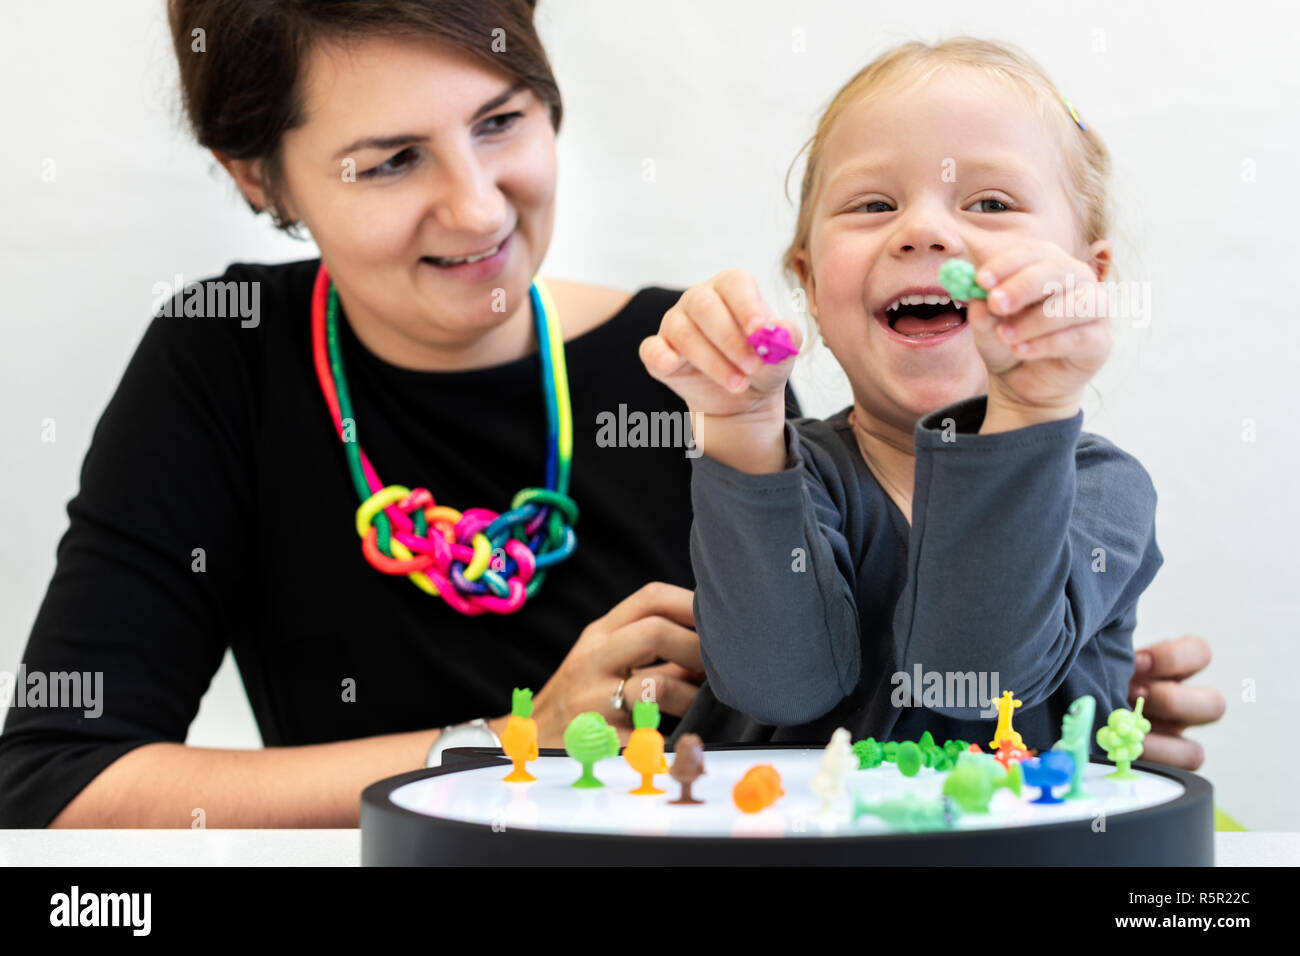 Toddler girl in child occupational therapy session doing sensory playful exercises with her therapist. Stock Photo